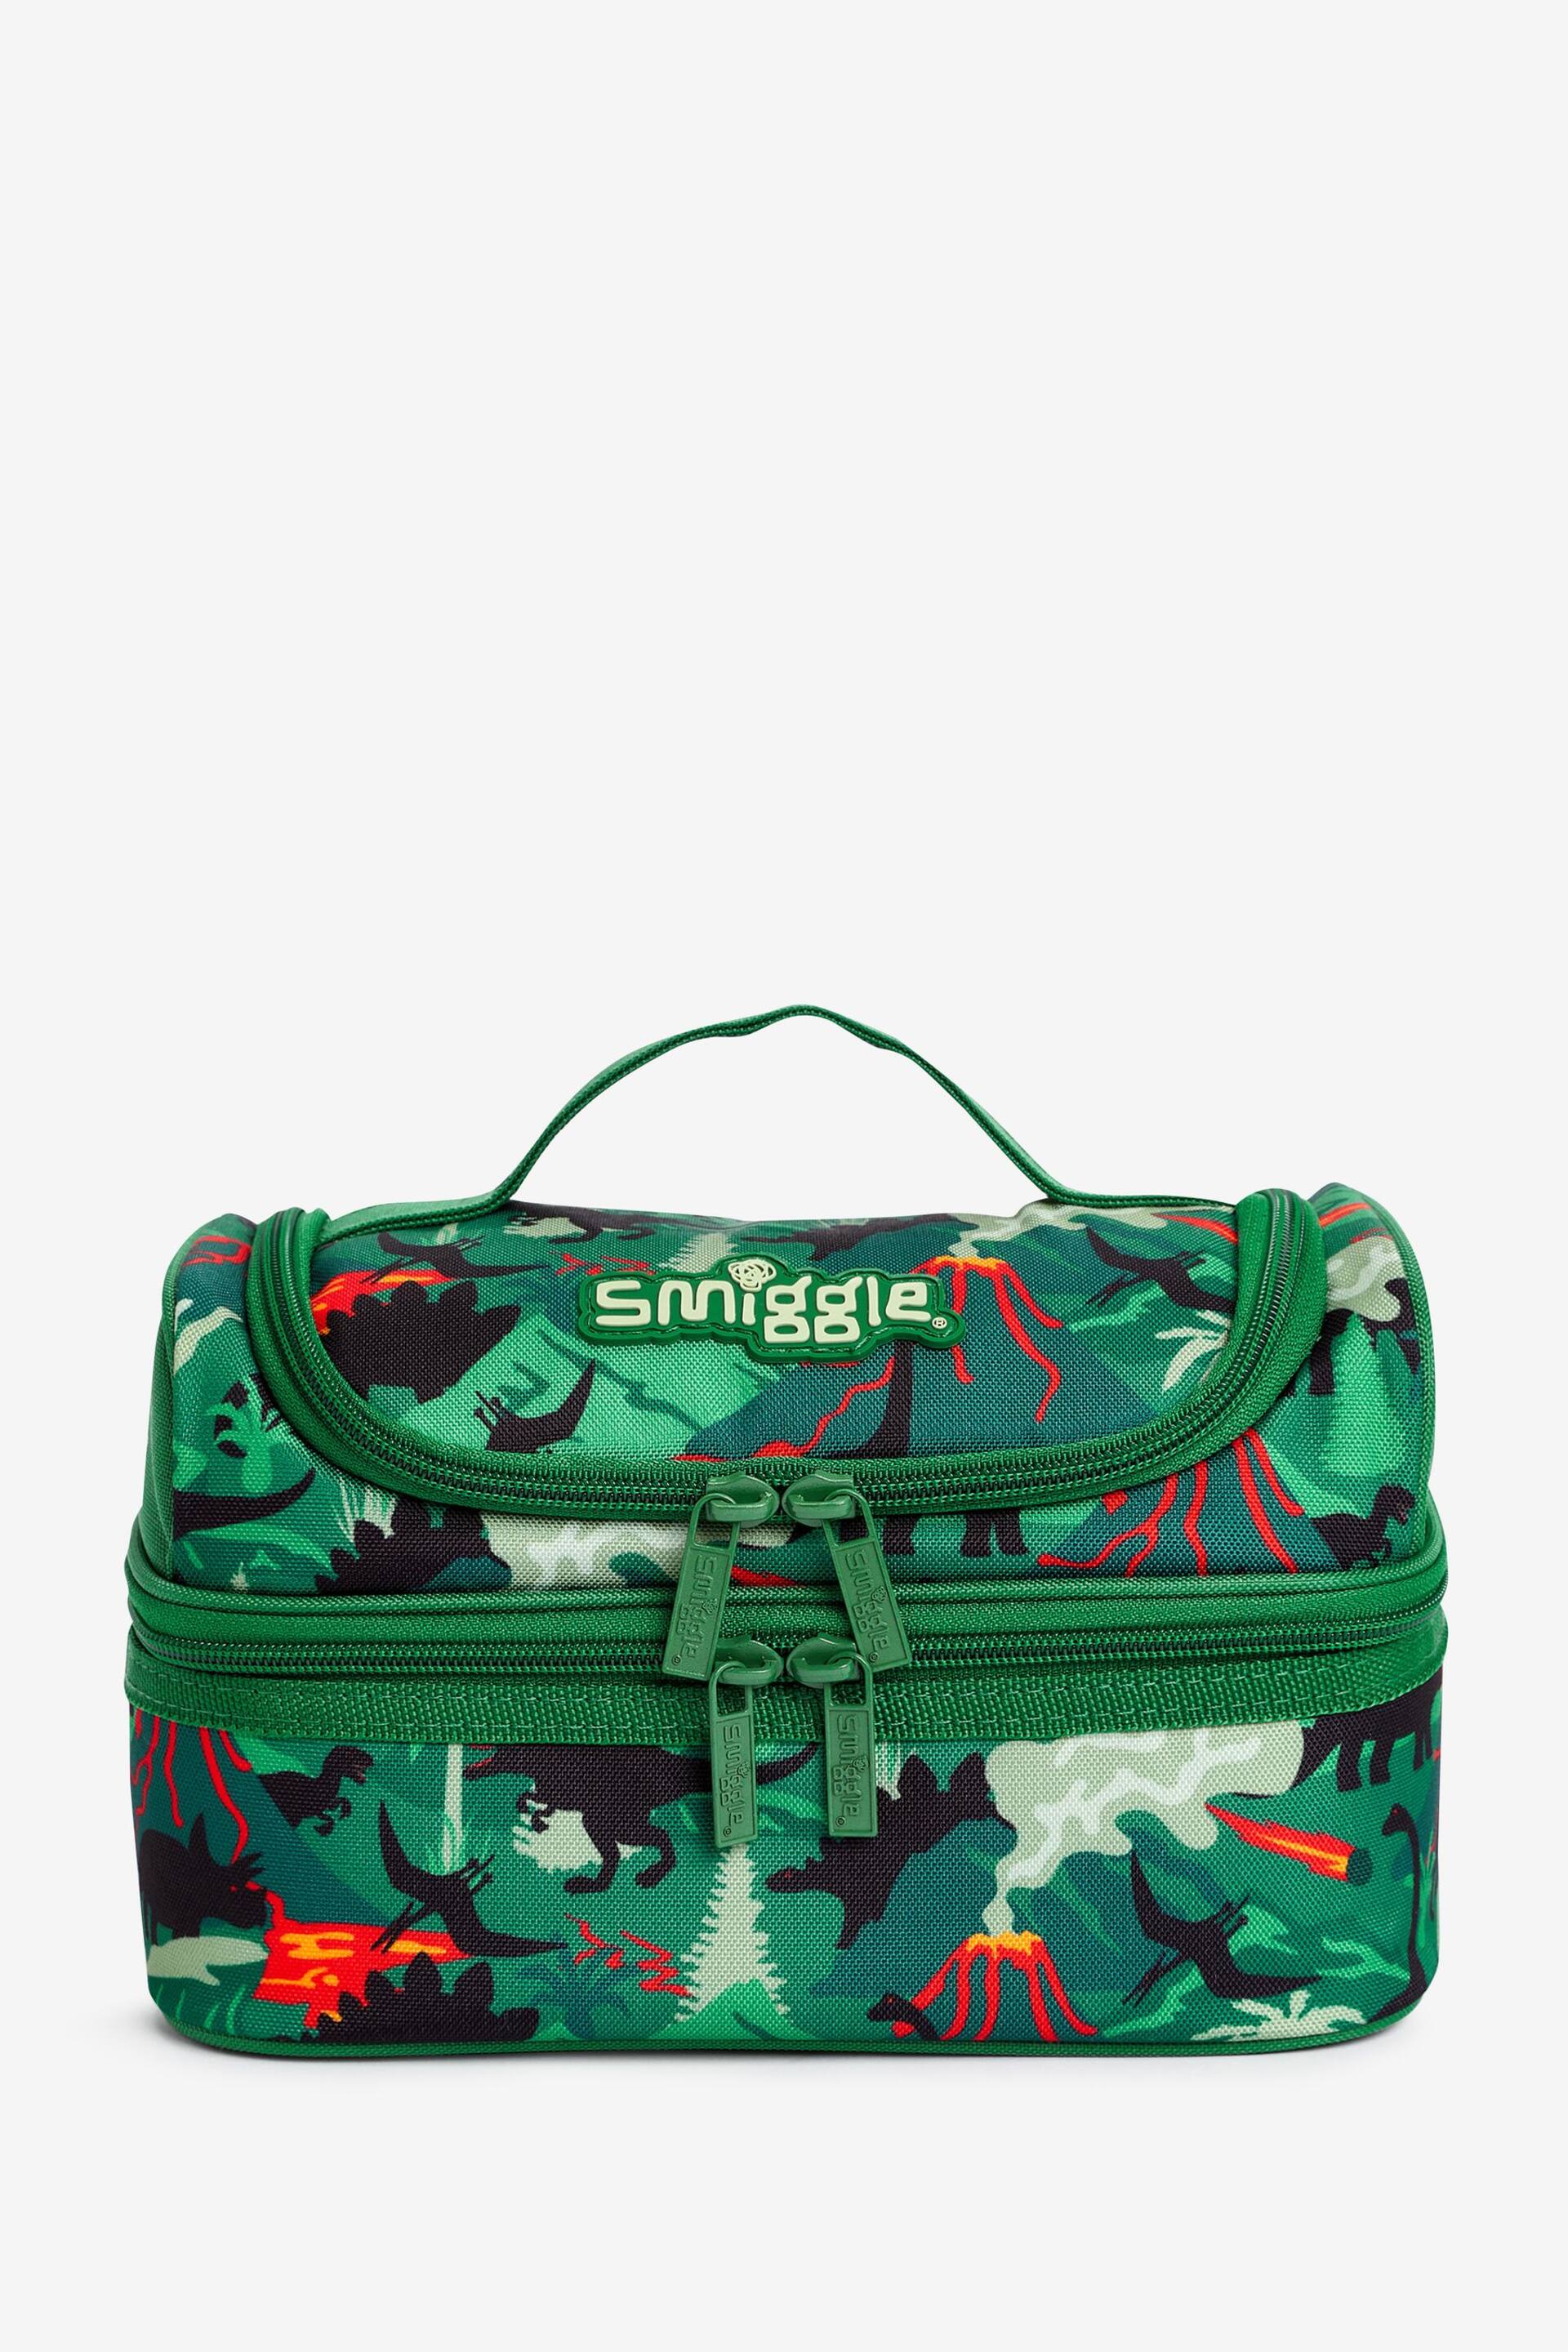 Smiggle Green Vivid Double Decker Lunchbox - Image 1 of 3